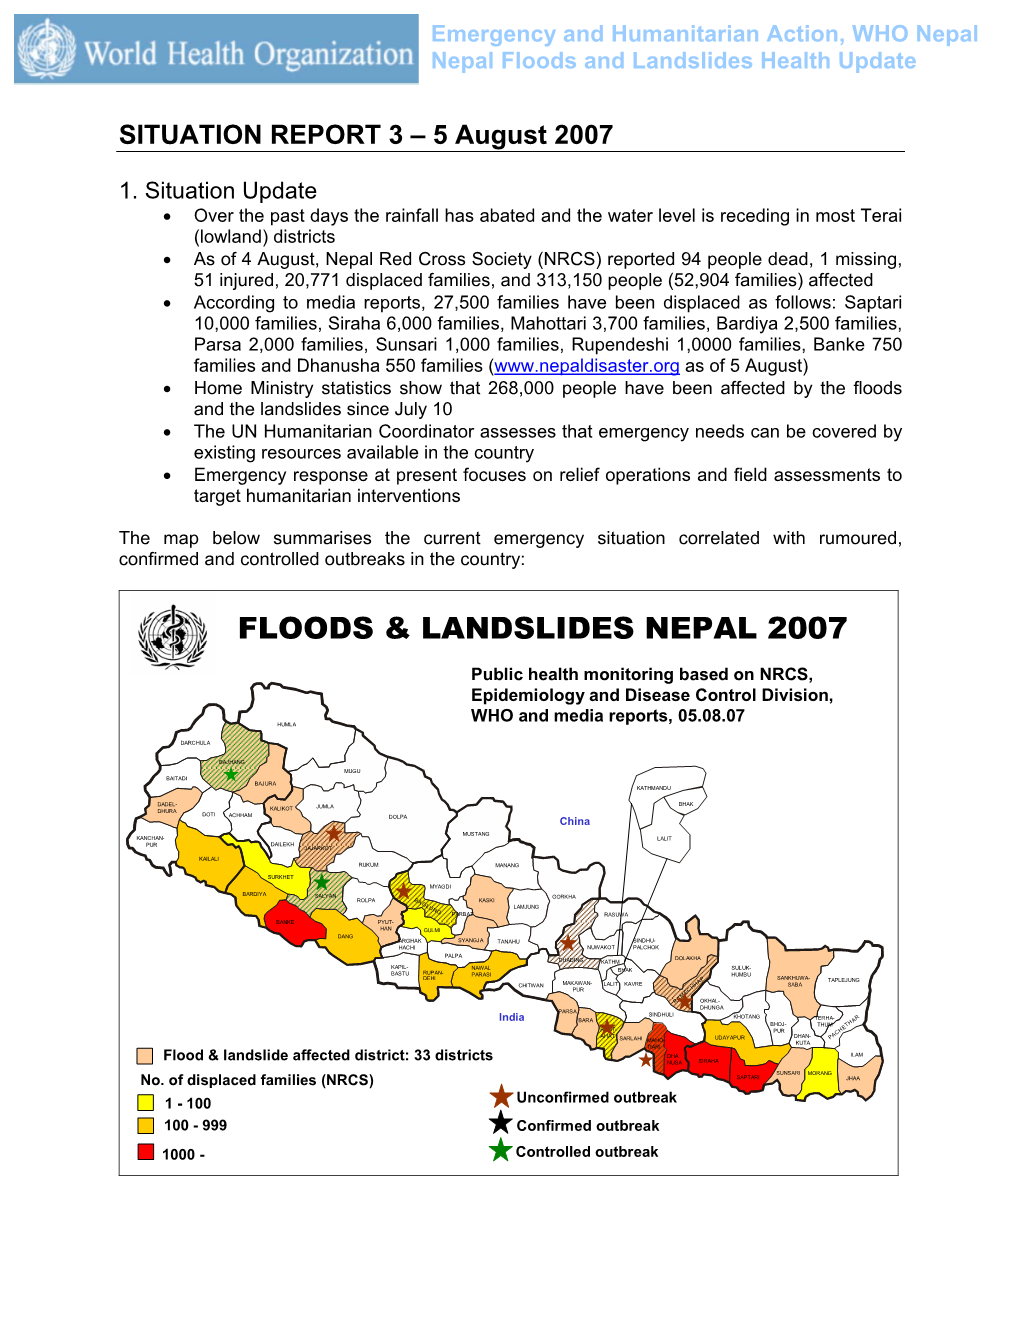 SITUATION REPORT 3 – 5 August 2007